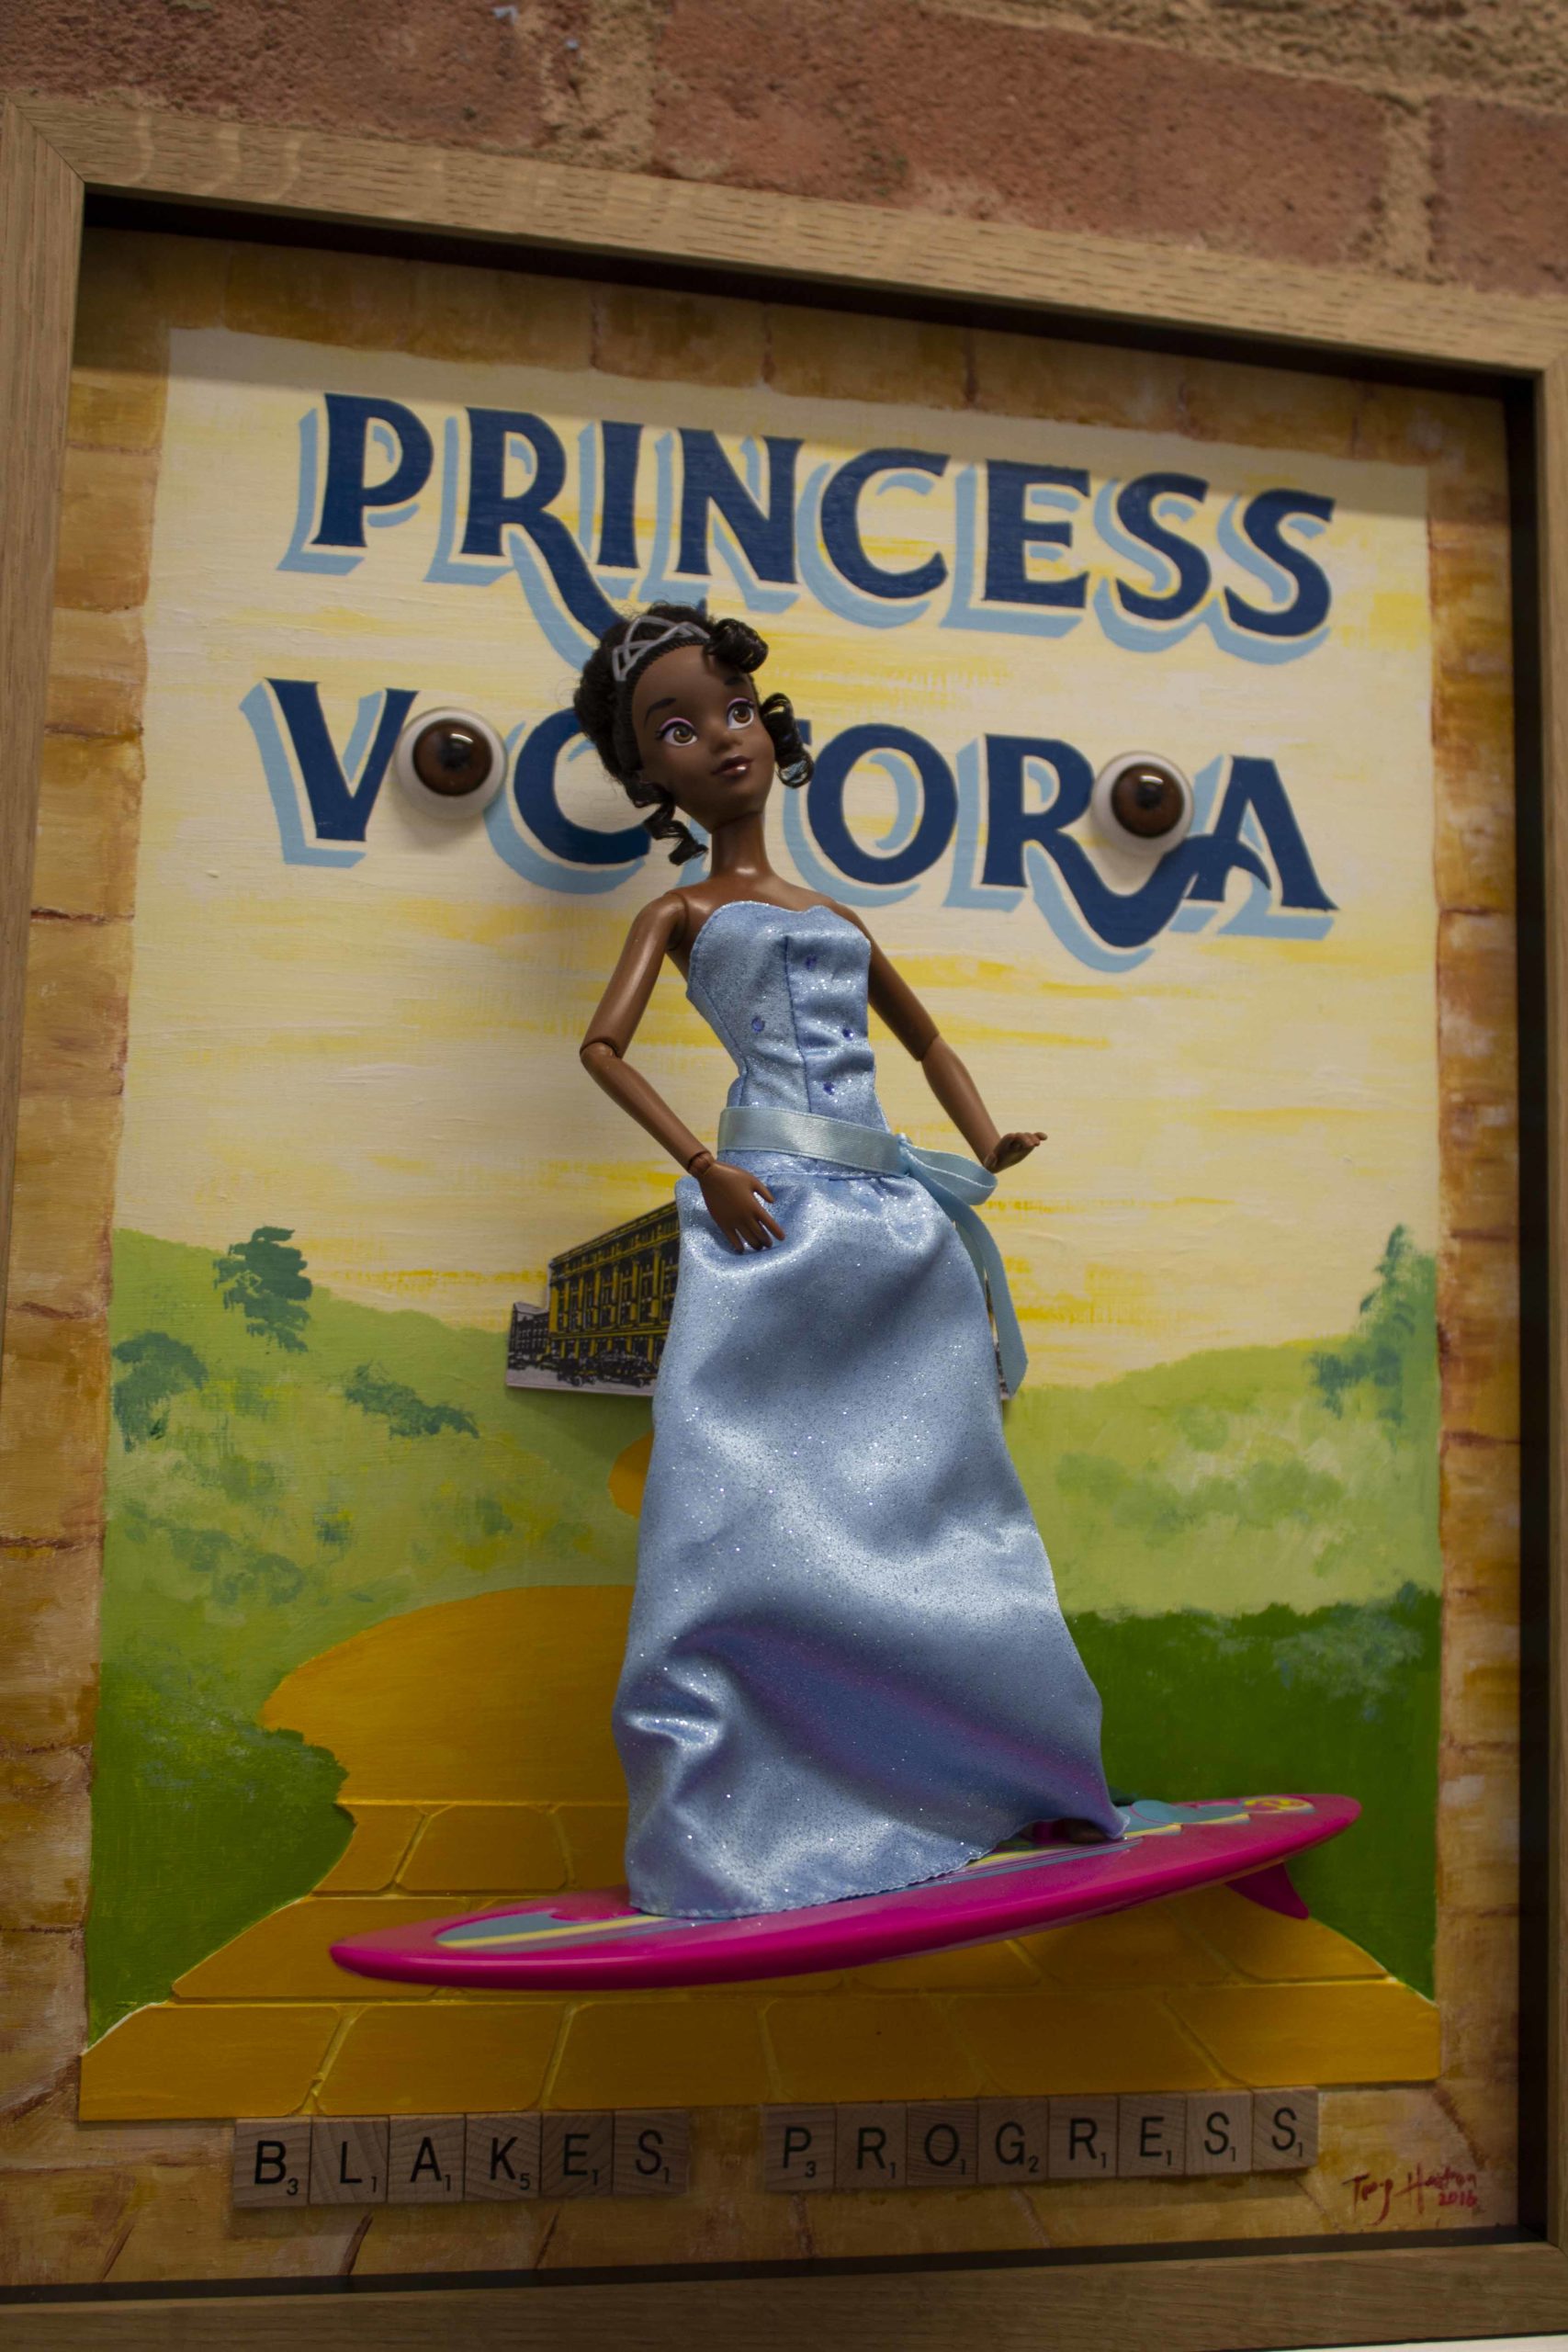 The background of the piece is a pale yellow sky, above a green landscape, either side of a yellow brick road. At the top of the page in blue letters are painted the words ‘Princess Victoria’. The letters I in Victoria have been replaced with three dimensional brown glass eyes. Protruding from the canvas is a black, Barbie-style doll in a pale blue evening dress and tiara, standing on a hot pink surf board.